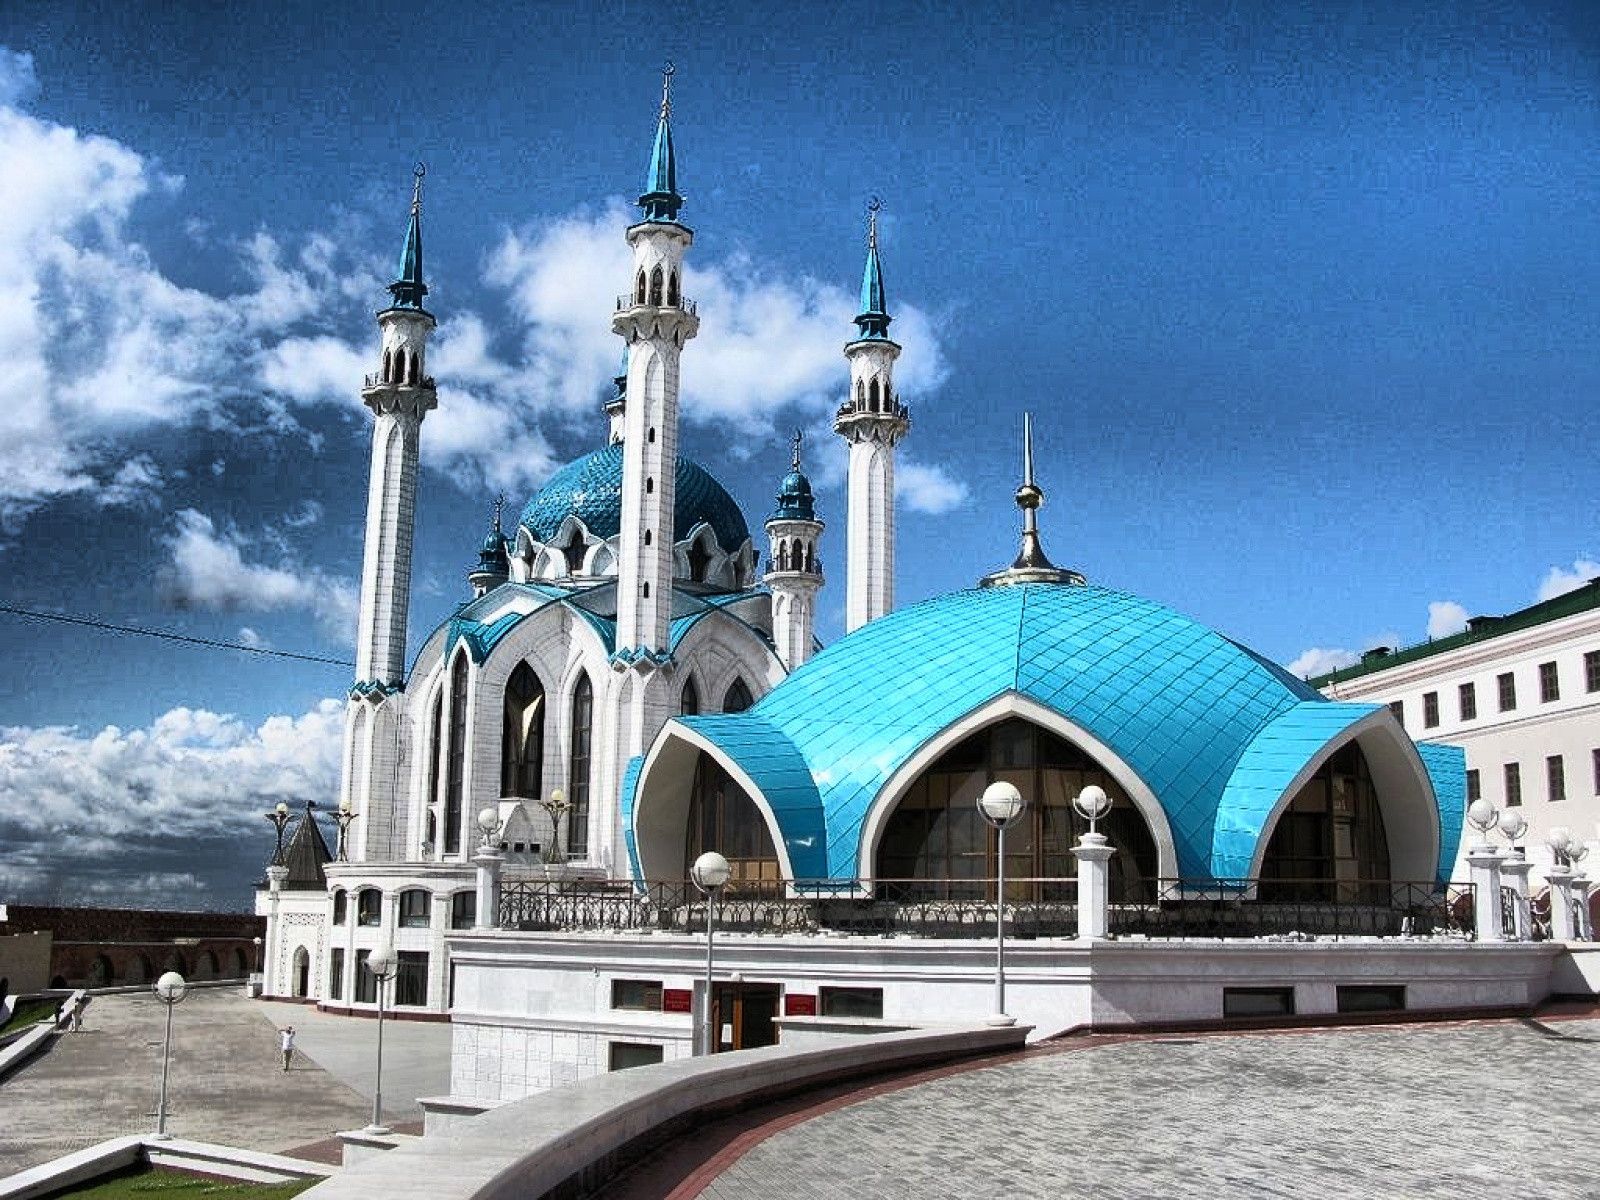 Download World Beautiful Mosque Wallpaper Gallery | Images ...